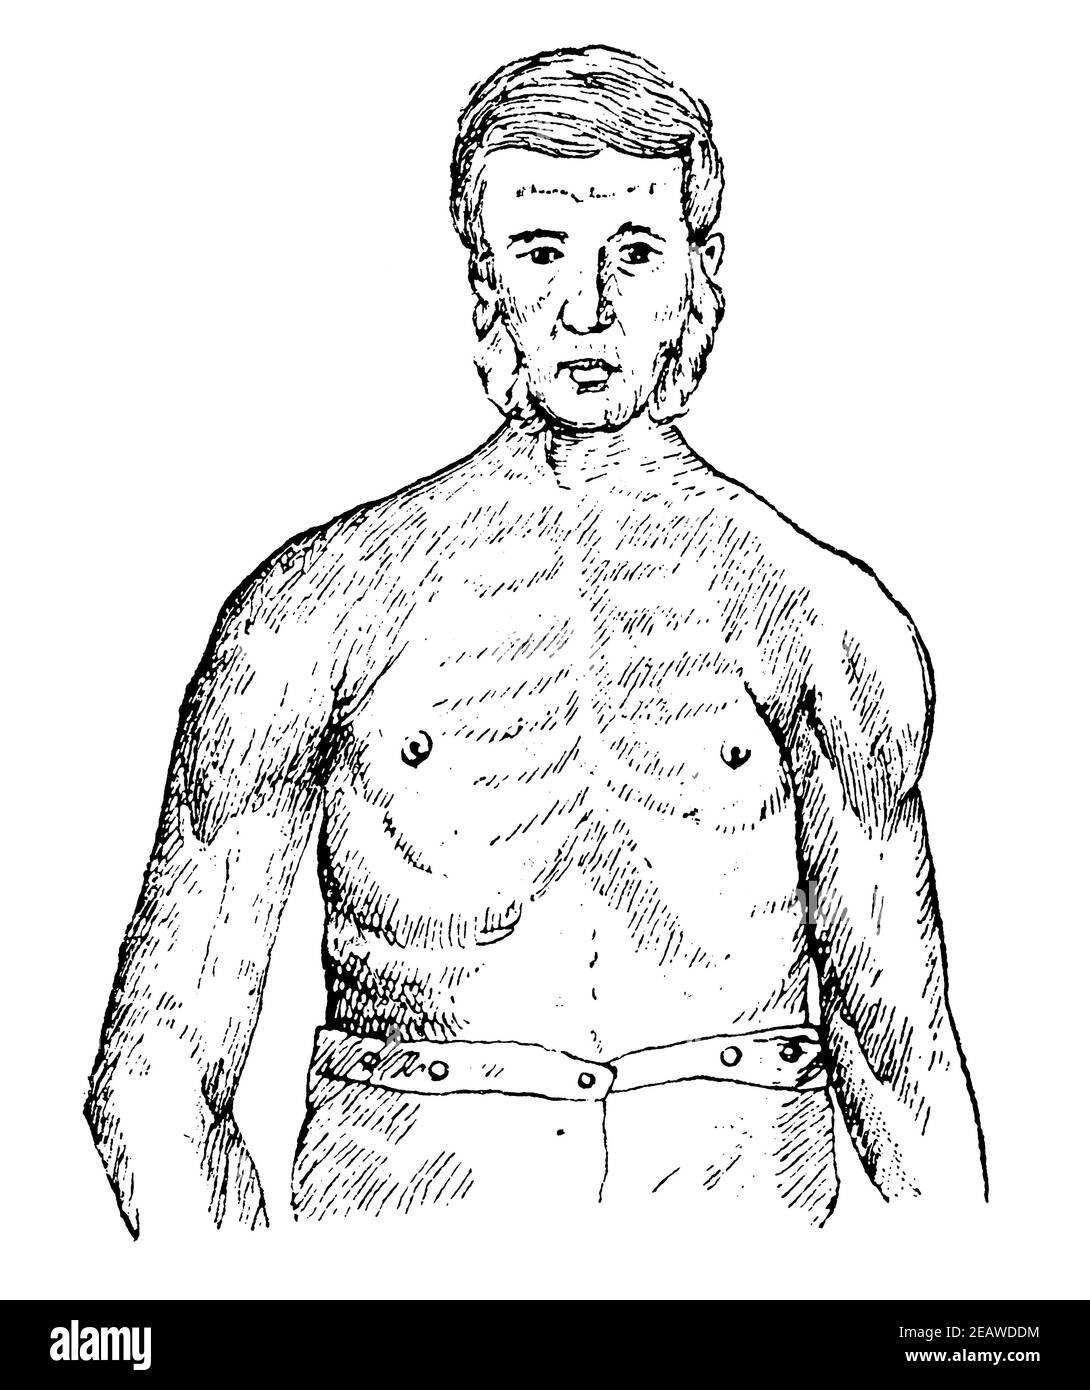 Muscle paralysis of the upper body of a worker due to chronic mercury poisoning. Front view. Illustration of the 19th century. Germany. White background. Stock Photo